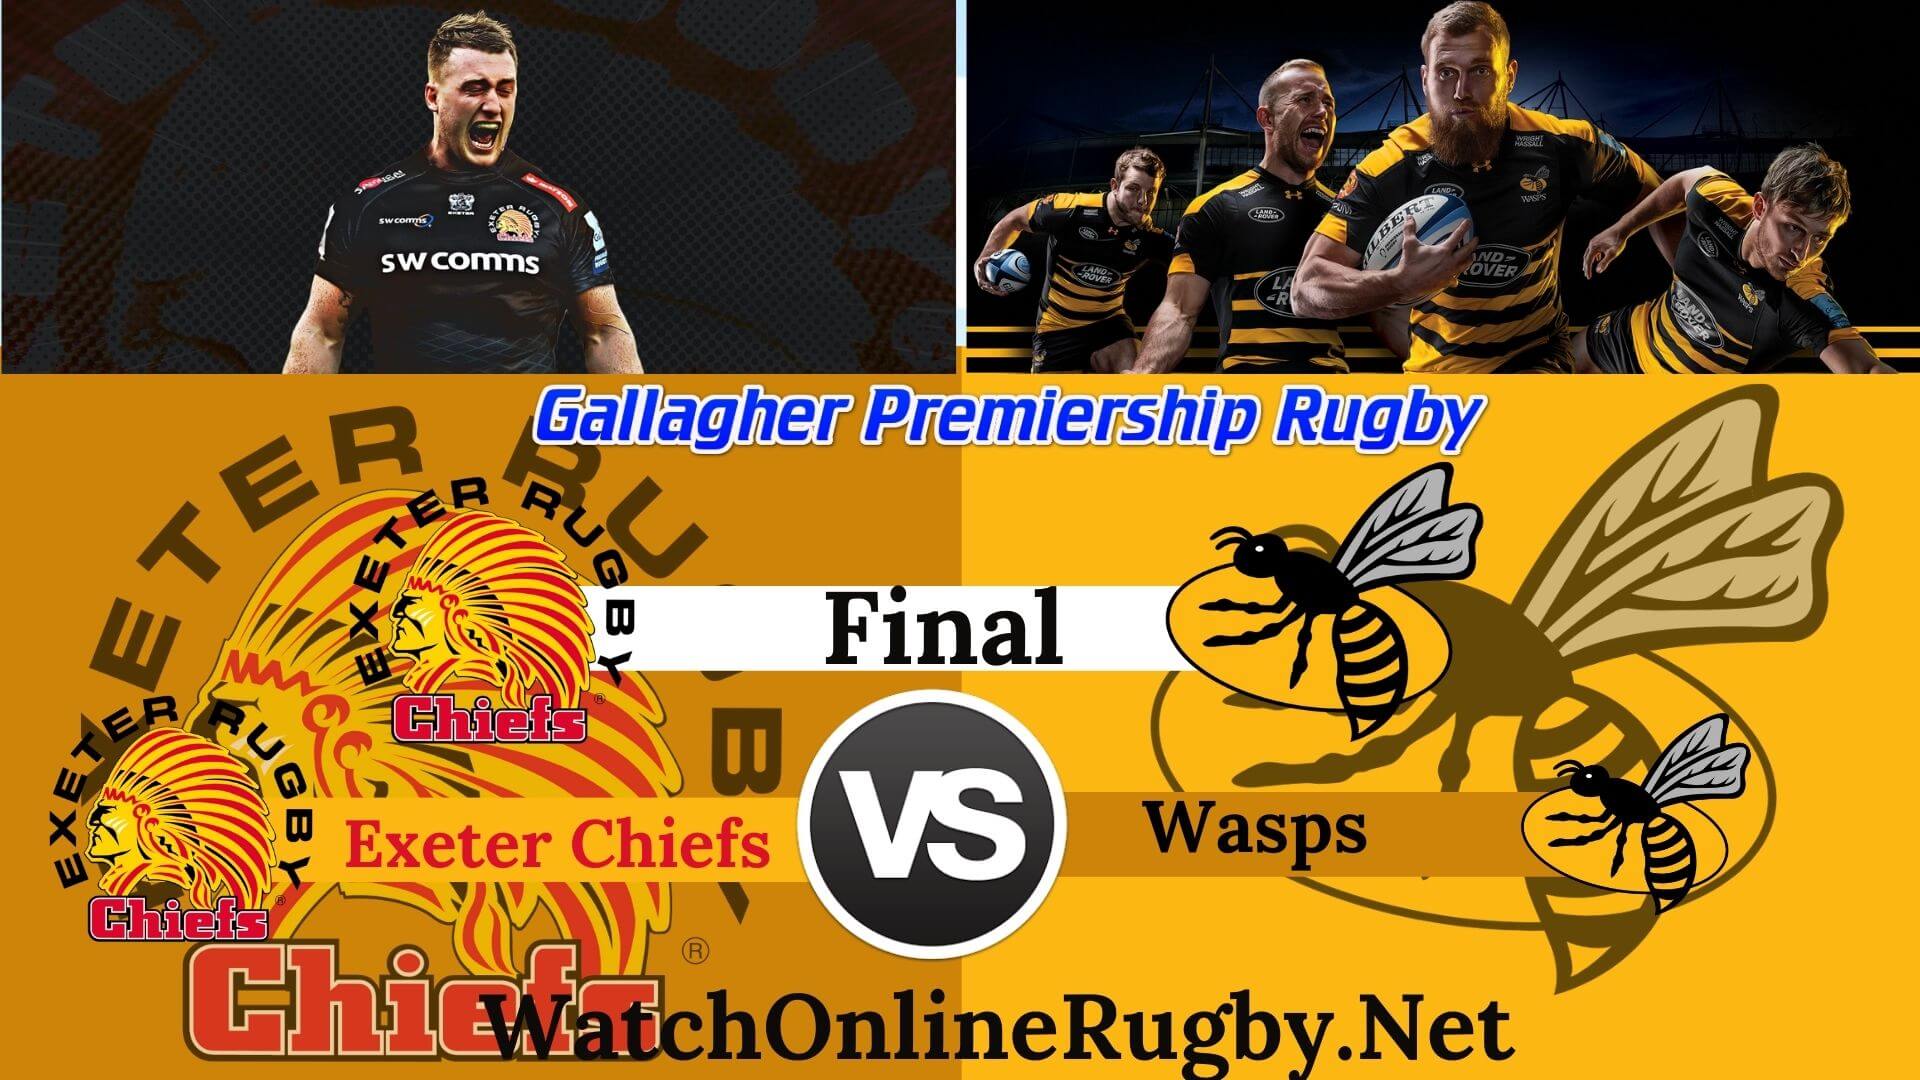 Exeter Chiefs vs Wasps Premiership Rugby 2020 Final